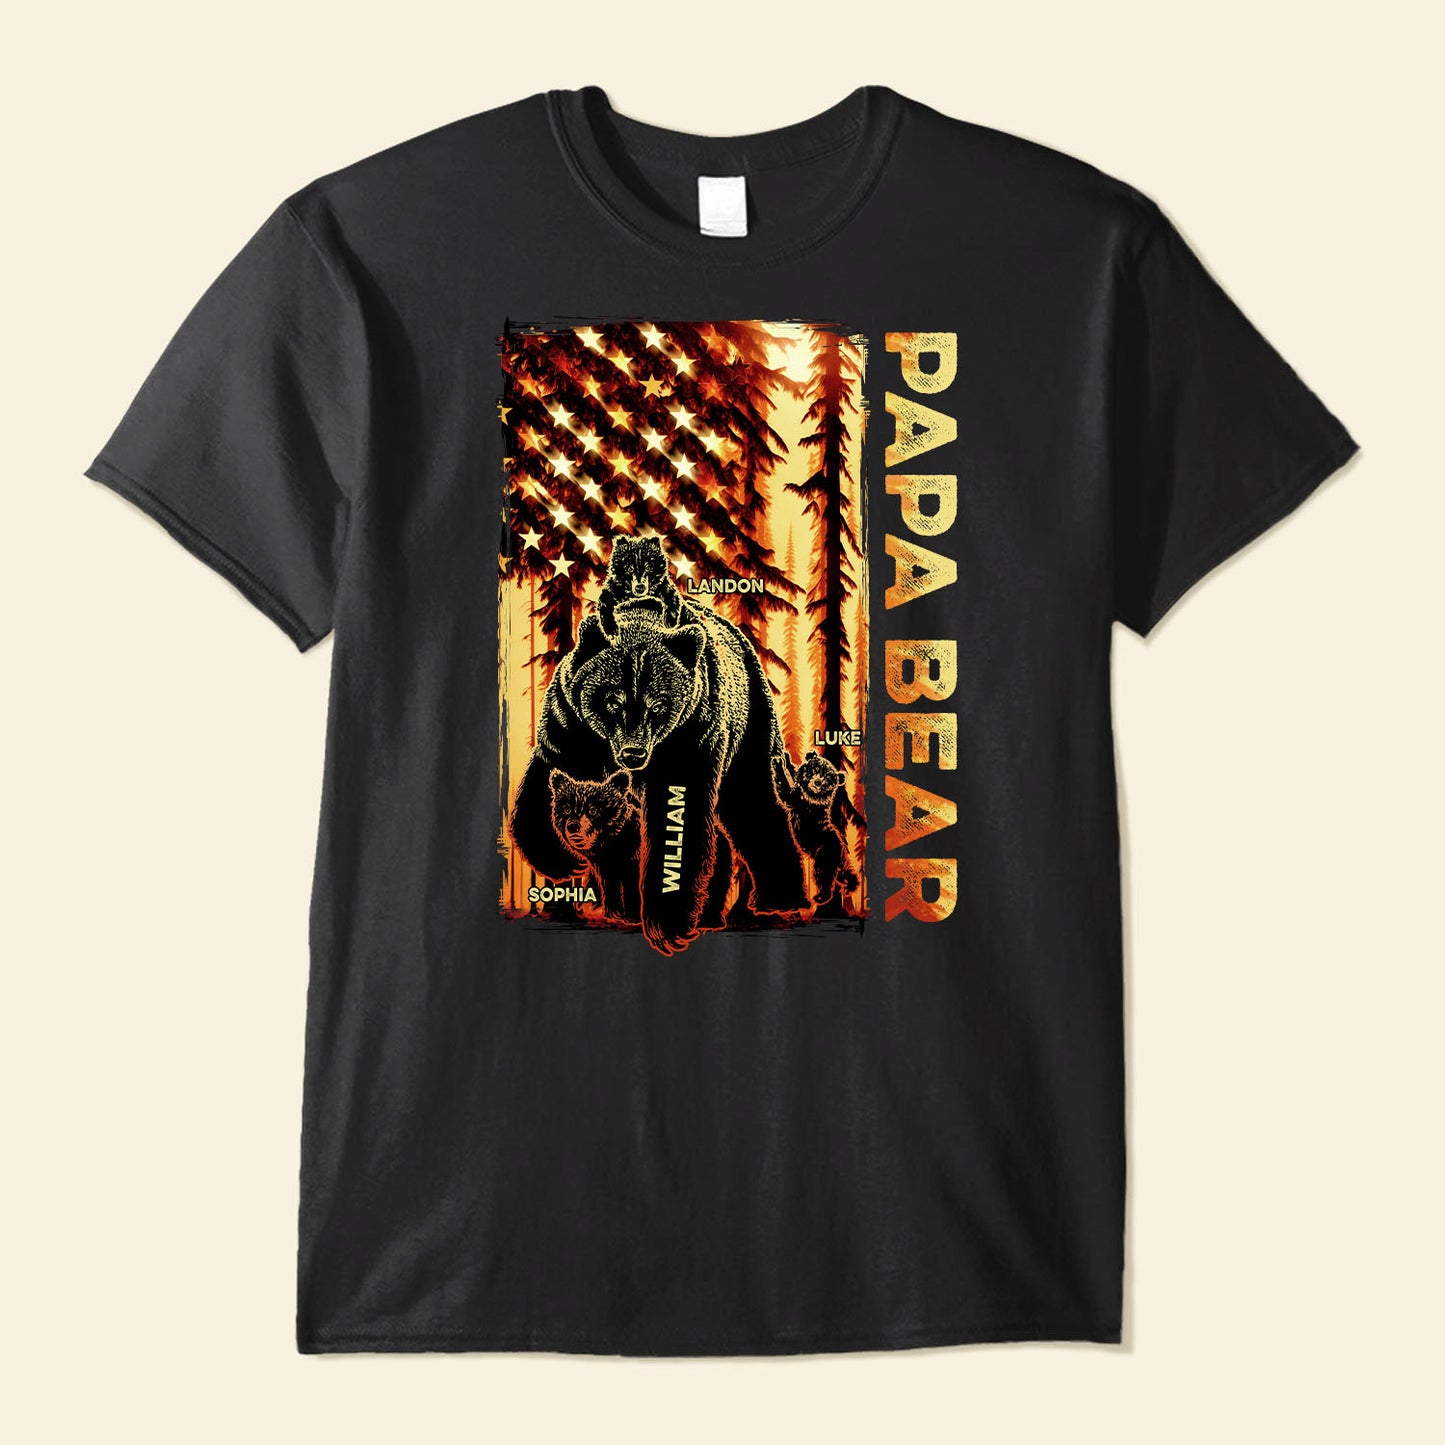 Papa Bear Forest Us Flag - Personalized Shirt